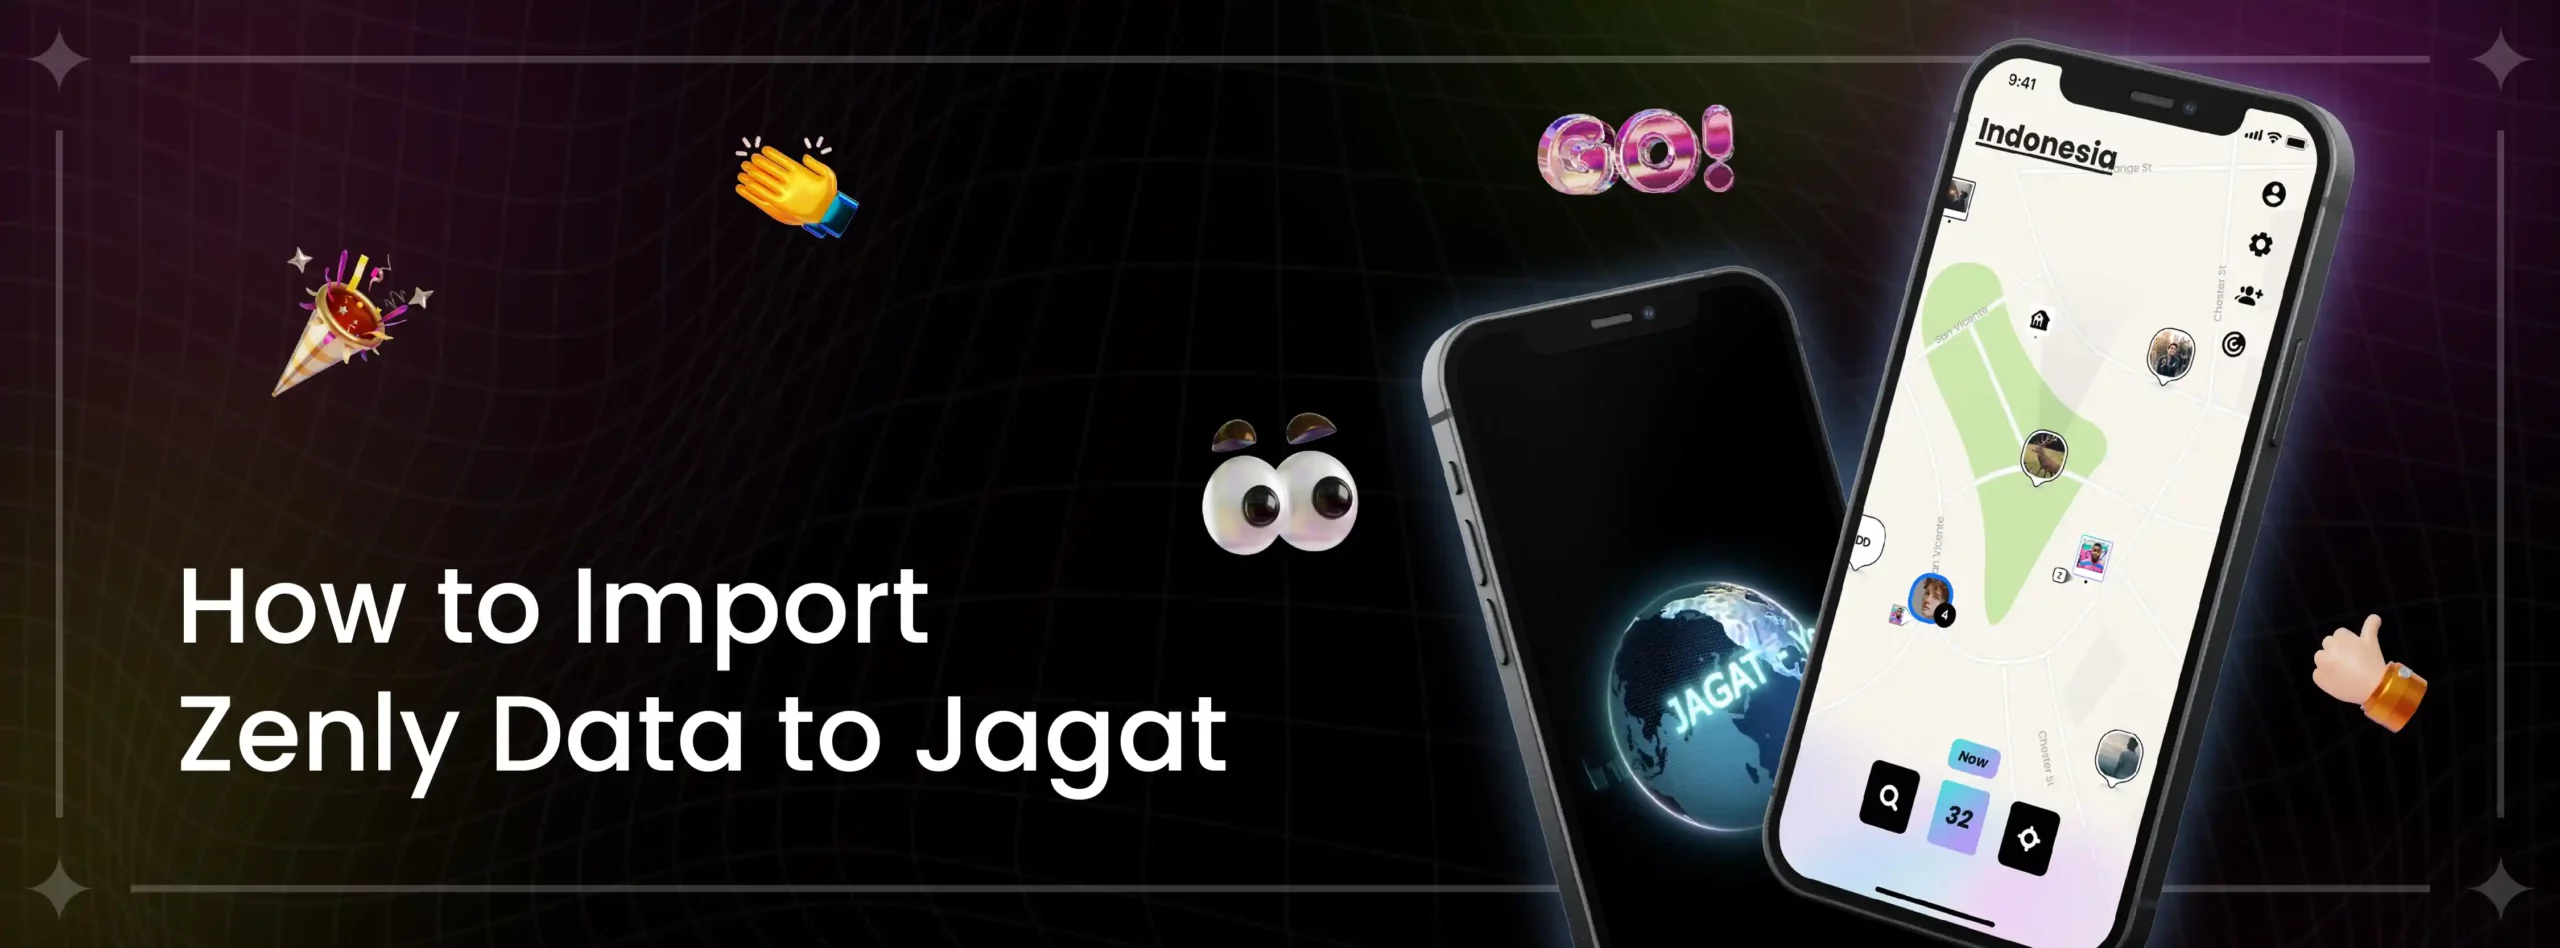 how to import zenly data to jagat